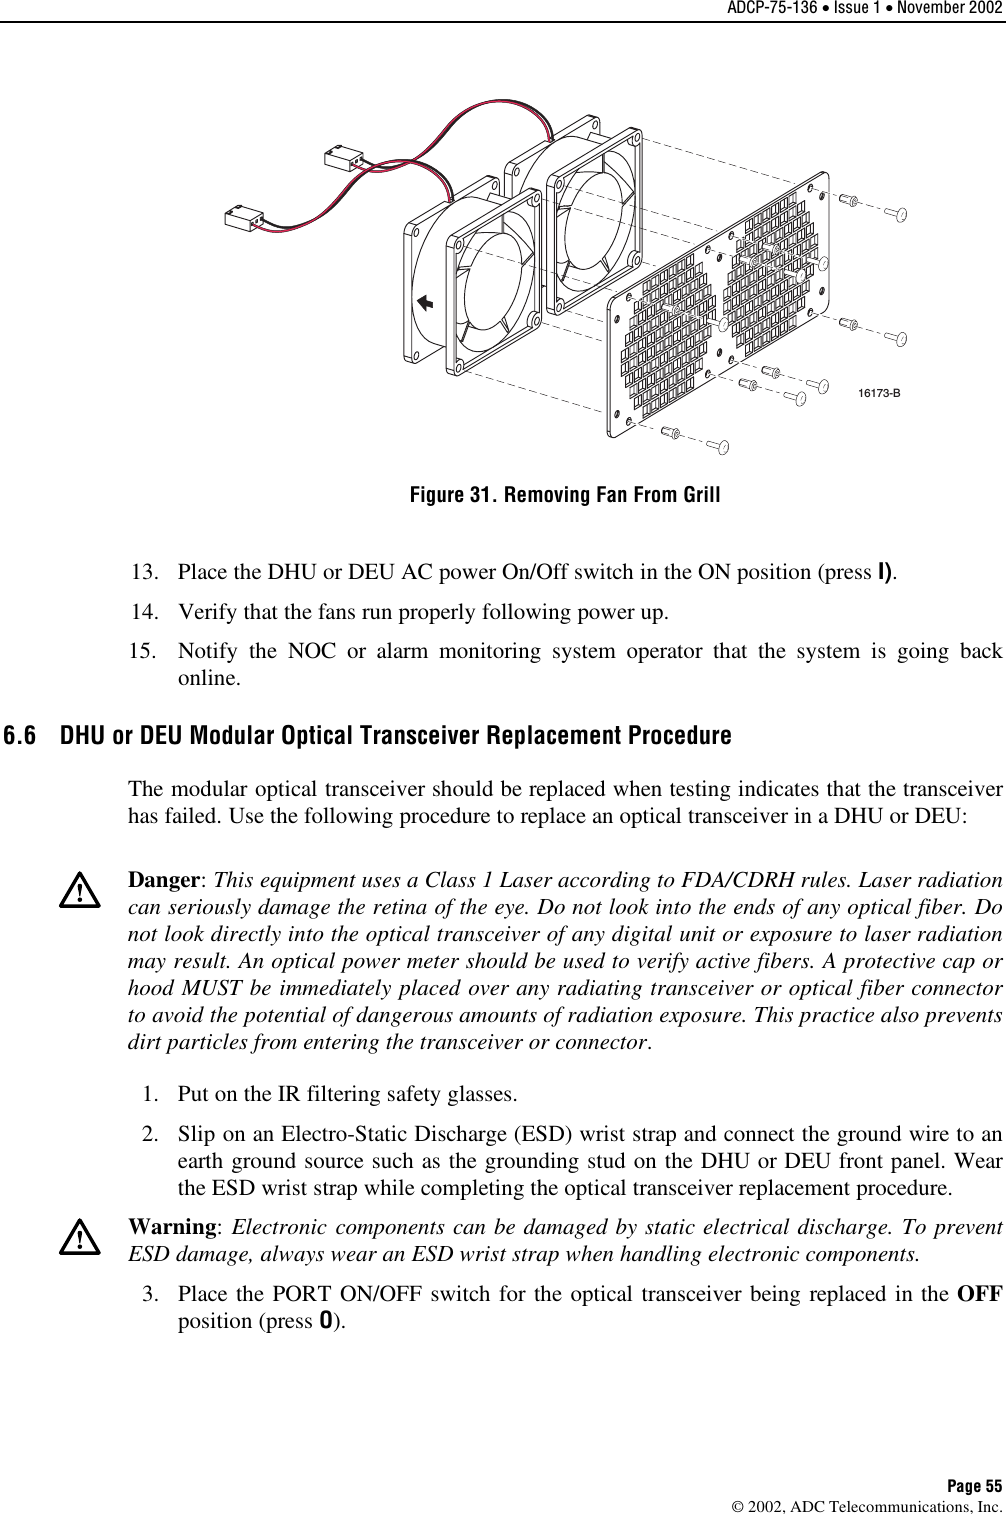 ADCP-75-136 • Issue 1 • November 2002 Page 55 ©2002, ADC Telecommunications, Inc.16173-BFigure 31. Removing Fan From Grill 13. Place the DHU or DEU AC power On/Off switch in the ON position (press I).14. Verify that the fans run properly following power up.15. Notify the NOC or alarm monitoring system operator that the system is going backonline.6.6  DHU or DEU Modular Optical Transceiver Replacement Procedure The modular optical transceiver should be replaced when testing indicates that the transceiverhas failed. Use the following procedure to replace an optical transceiver in aDHU or DEU:Danger:This equipment uses aClass 1Laser according to FDA/CDRH rules. Laser radiationcan seriously damage the retina of the eye. Do not look into the ends of any optical fiber. Donot look directly into the optical transceiver of any digital unit or exposure to laser radiationmay result. An optical power meter should be used to verify active fibers. Aprotective cap orhood MUST be immediately placed over any radiating transceiver or optical fiber connectorto avoid the potential of dangerous amounts of radiation exposure. This practice also preventsdirt particles from entering the transceiver or connector.1. Put on the IR filtering safety glasses.2. Slip on an Electro-Static Discharge (ESD) wrist strap and connect the ground wire to anearth ground source such as the grounding stud on the DHU or DEU front panel. Wearthe ESD wrist strap while completing the optical transceiver replacement procedure.Warning:Electronic components can be damaged by static electrical discharge. To preventESD damage, always wear an ESD wrist strap when handling electronic components.3. Place the PORT ON/OFF switch for the optical transceiver being replaced in the OFFposition (press O).